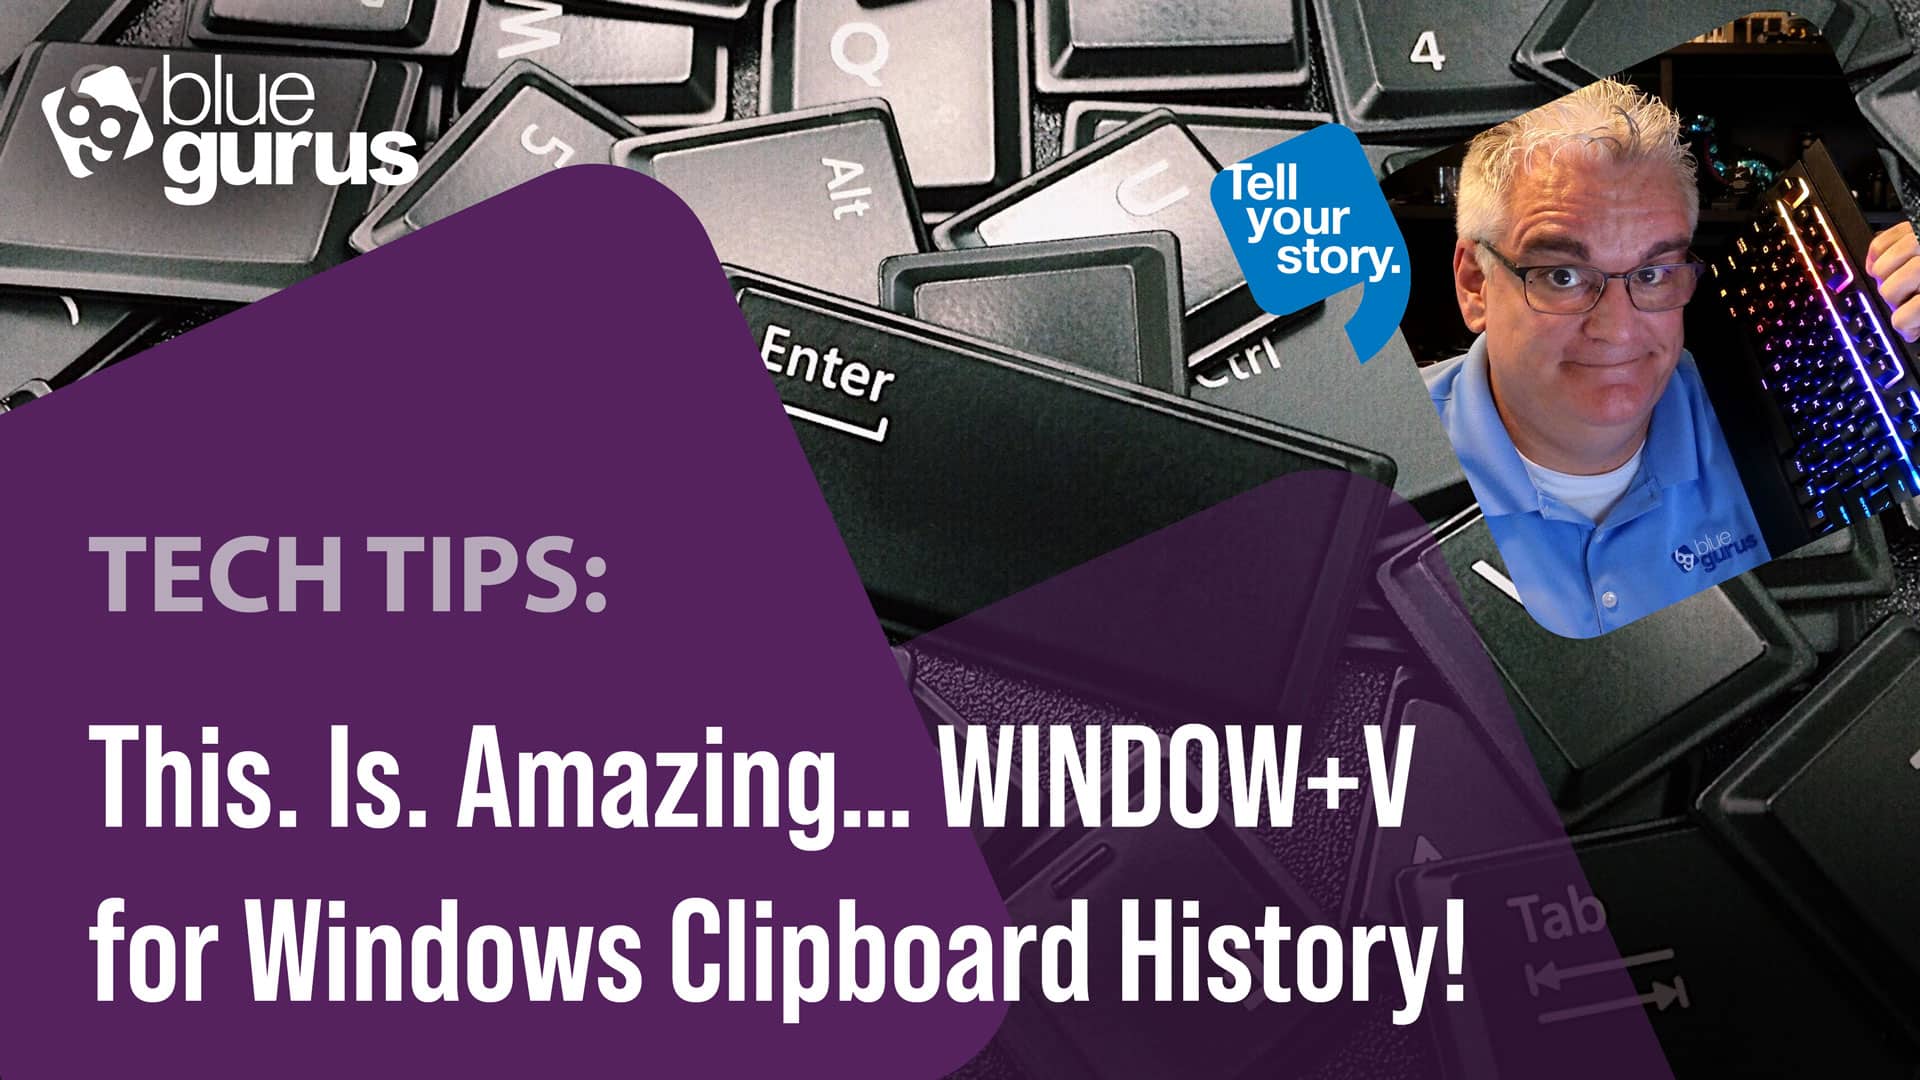 Tech Tips: This. Is. Amazing… WINDOW+V for Windows Clipboard History!